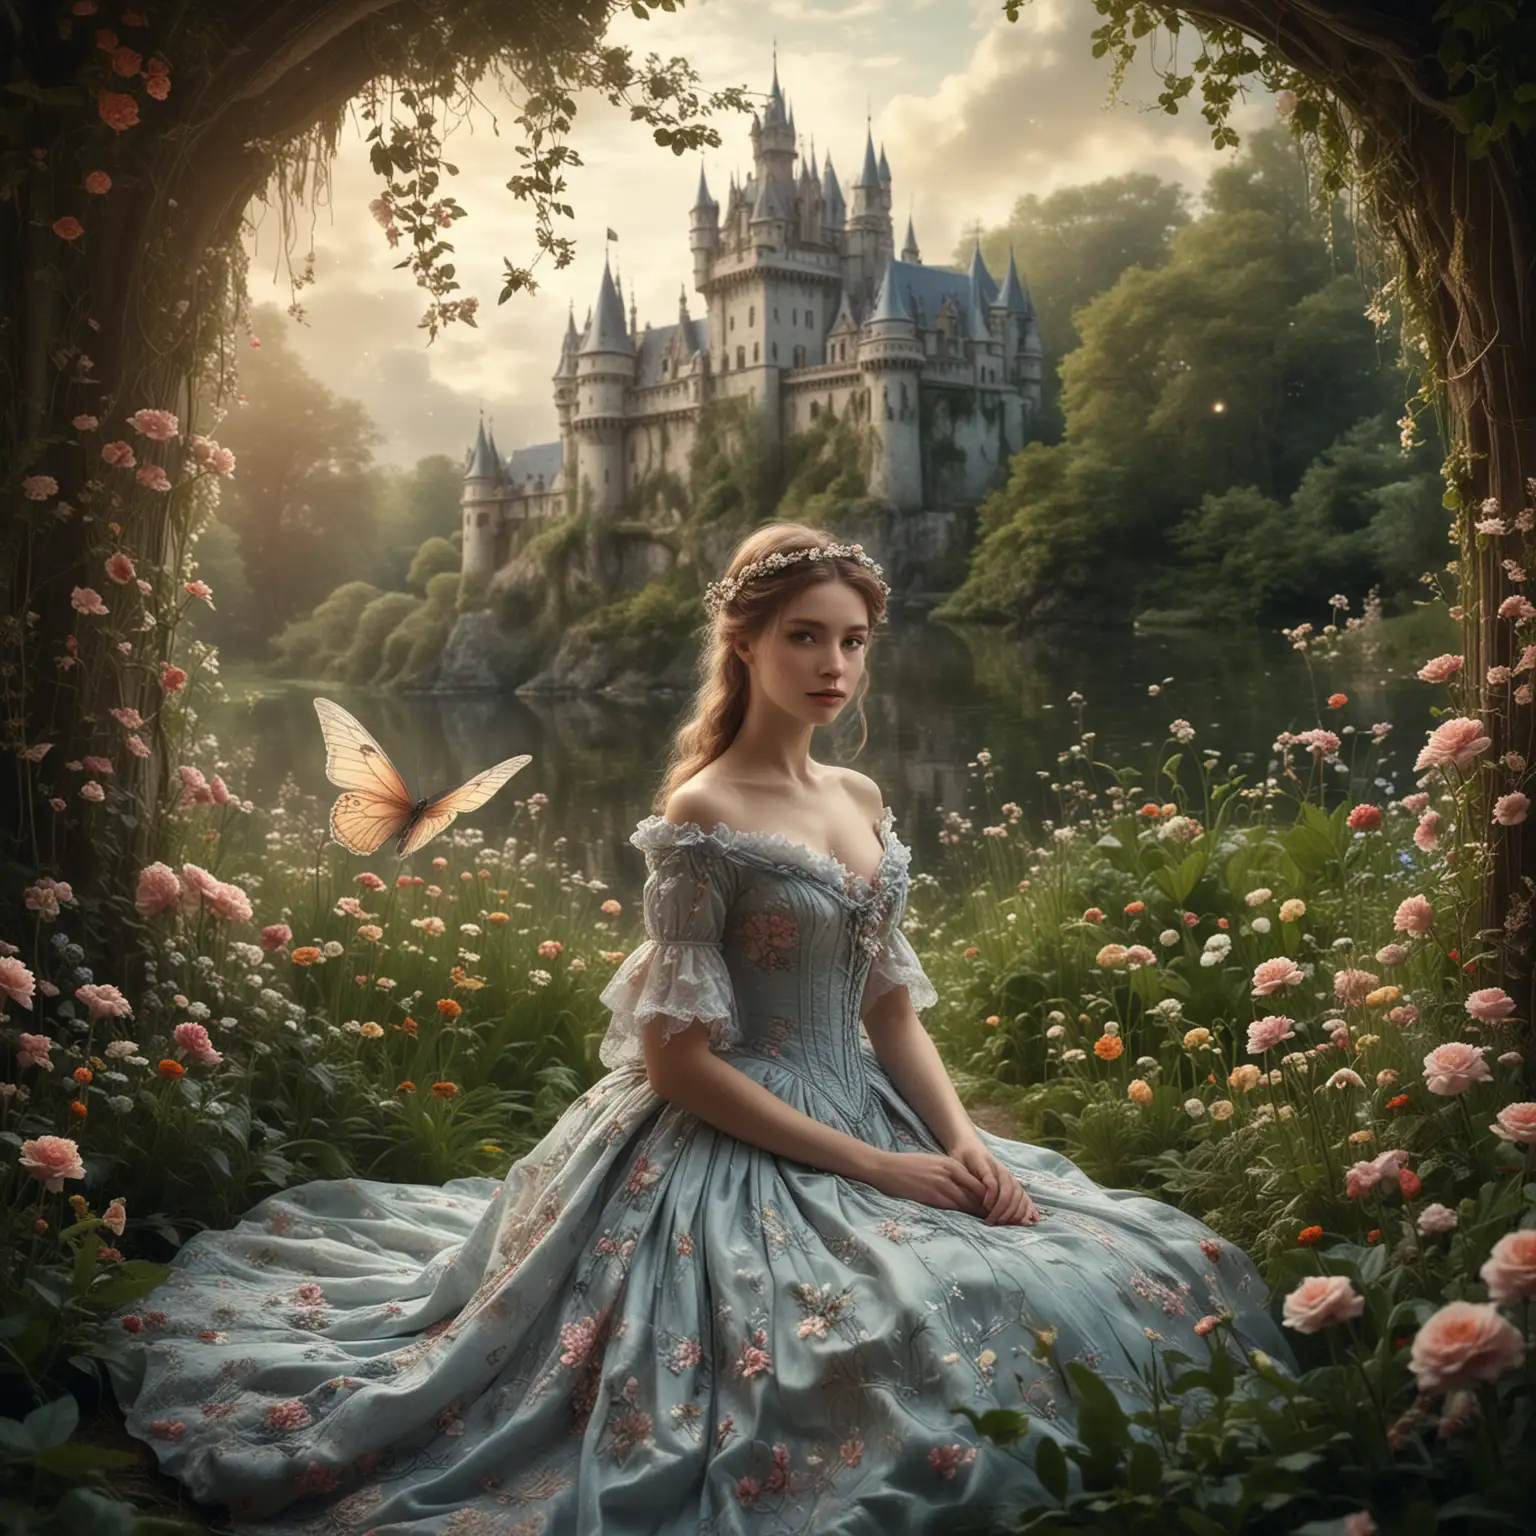 A realistic beautiful magical and fantastic photo presents a scene like from a beautiful fairy tale, where the center of the composition is occupied by a mysterious, beautiful female figure. She is dressed in a delicate Victorian dress adorned with subtle, ethereal patterns that make the fabric seem almost unreal. Around it, in a lush, enchanted landscape, you can see a variety of beautiful flowers and fantastic, charming animals that do not exist in our world - animals that add depth to the whole scene. In the background, he sees a majestic castle that adds an element of mystery and magic to this fairy-tale composition.